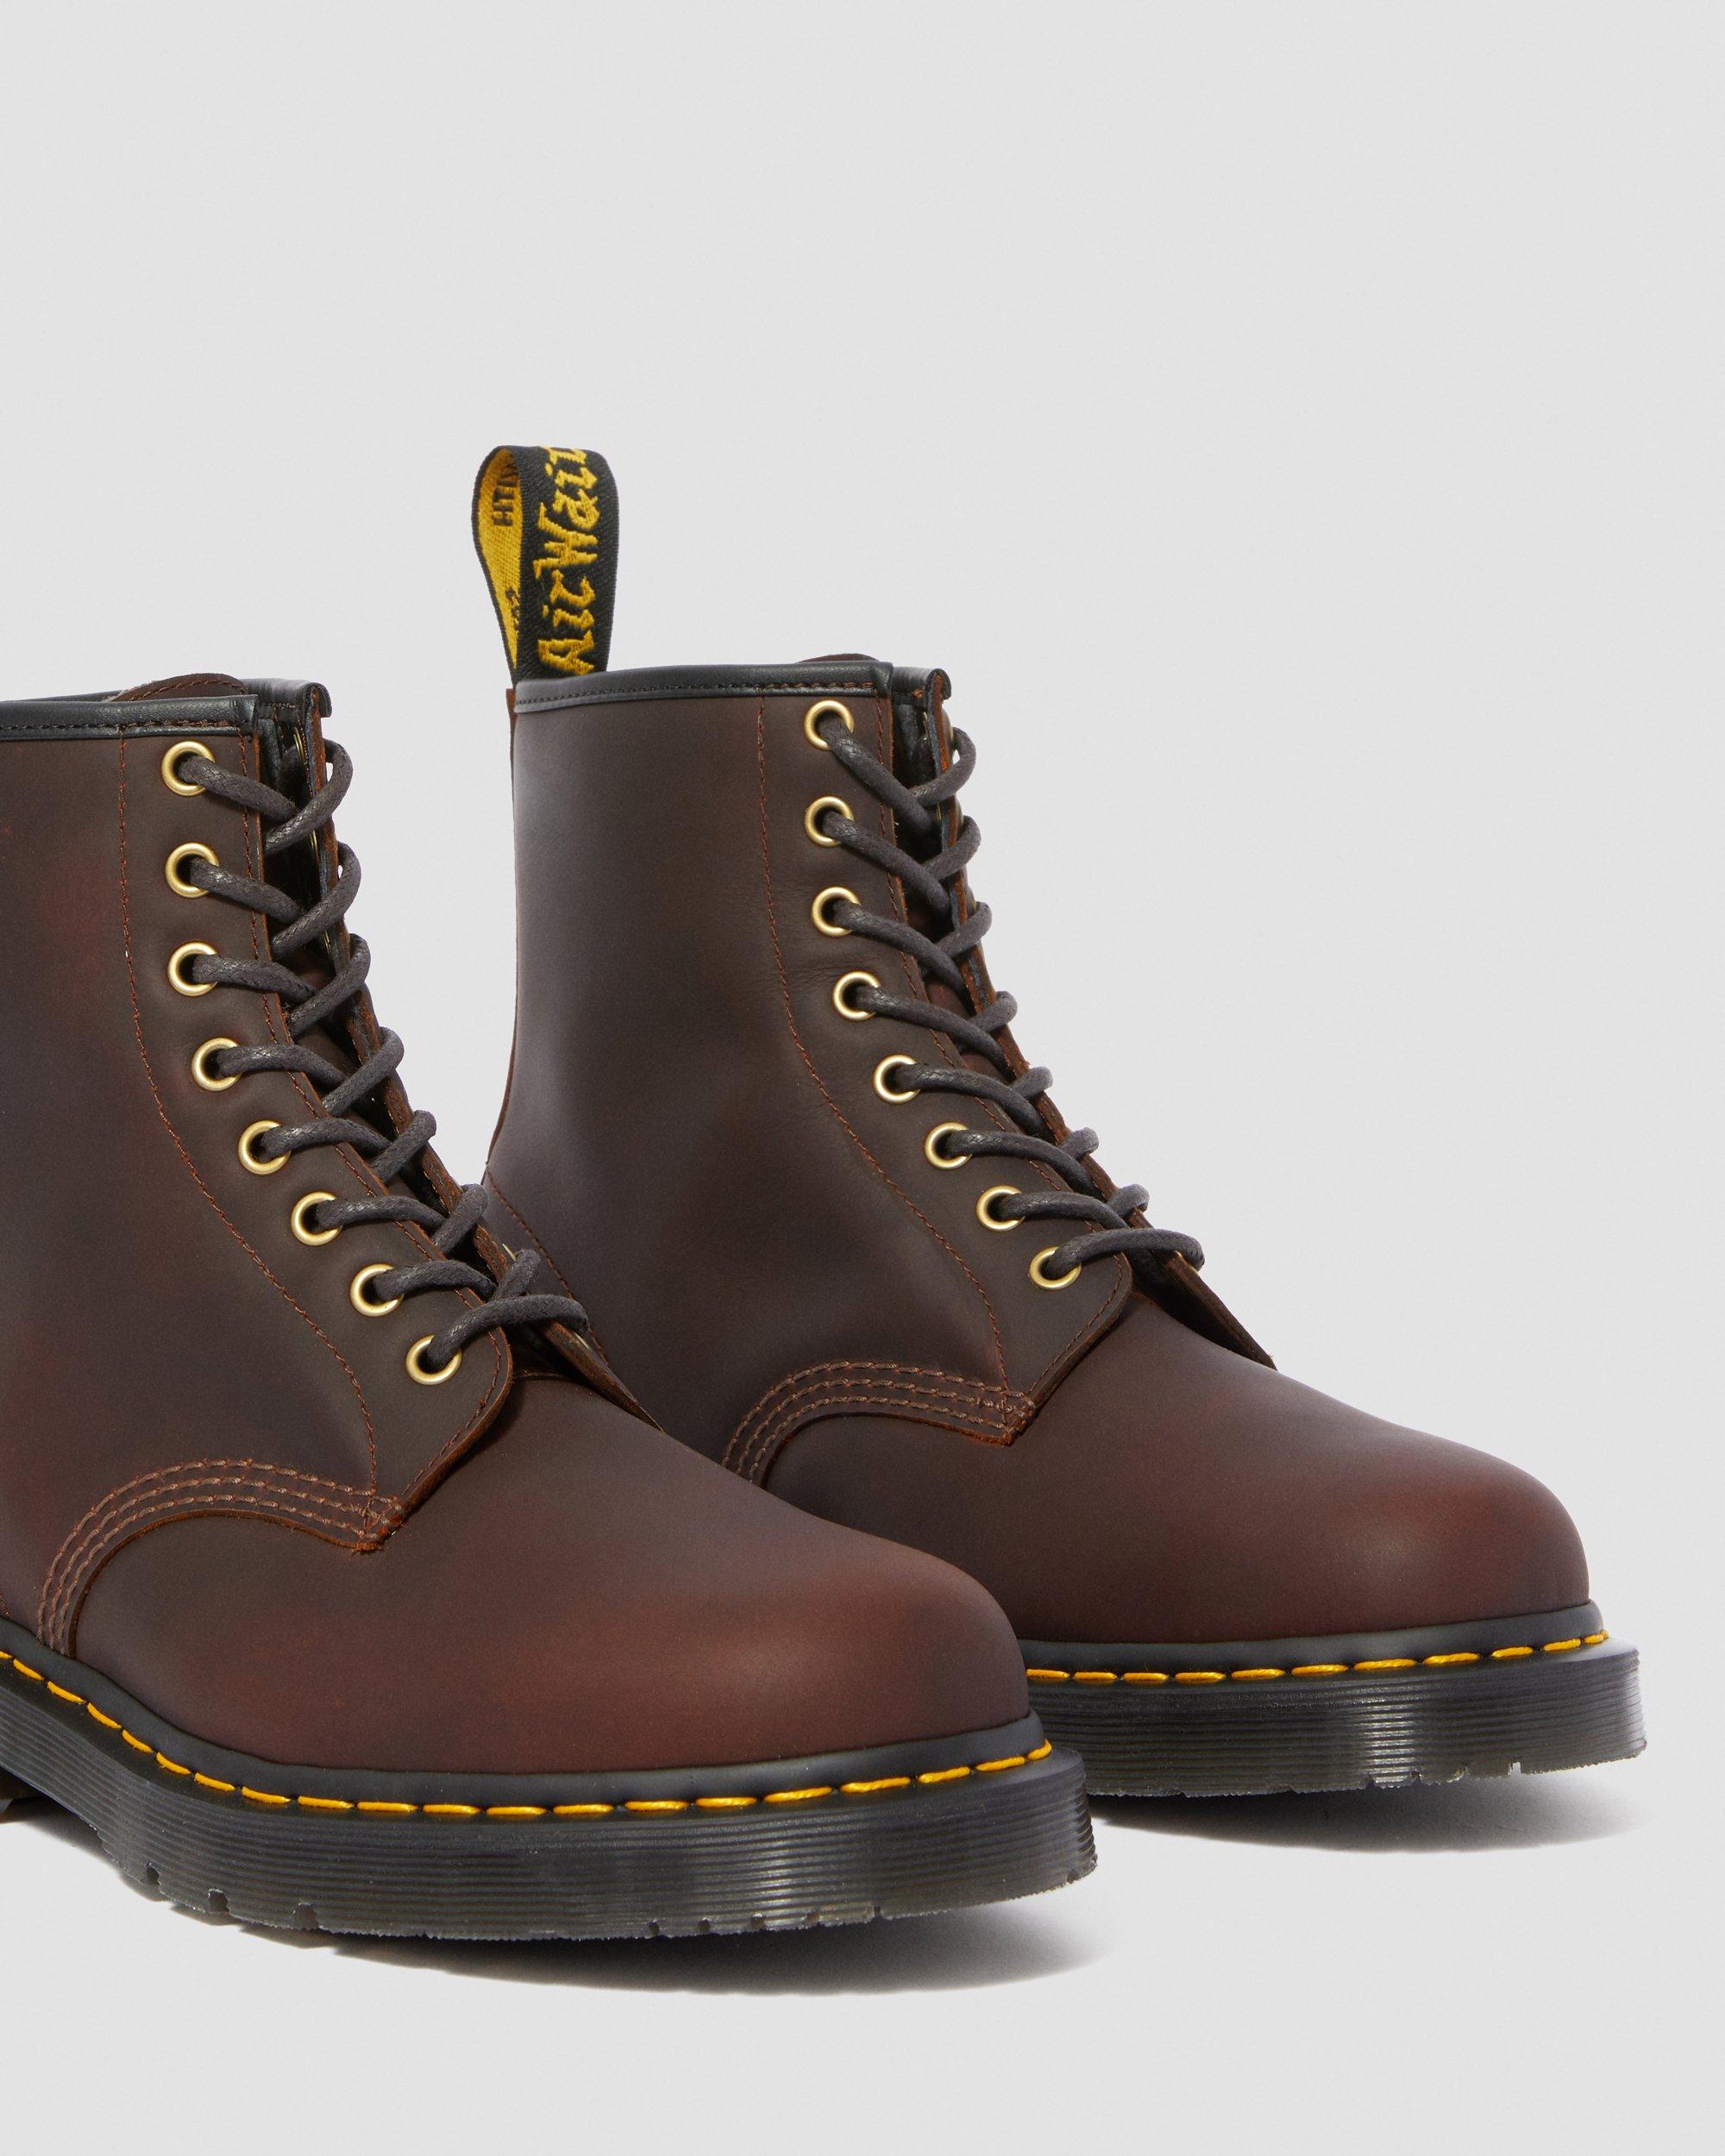 1460DM's Wintergrip Leather Ankle Boots in Cocoa | Dr. Martens